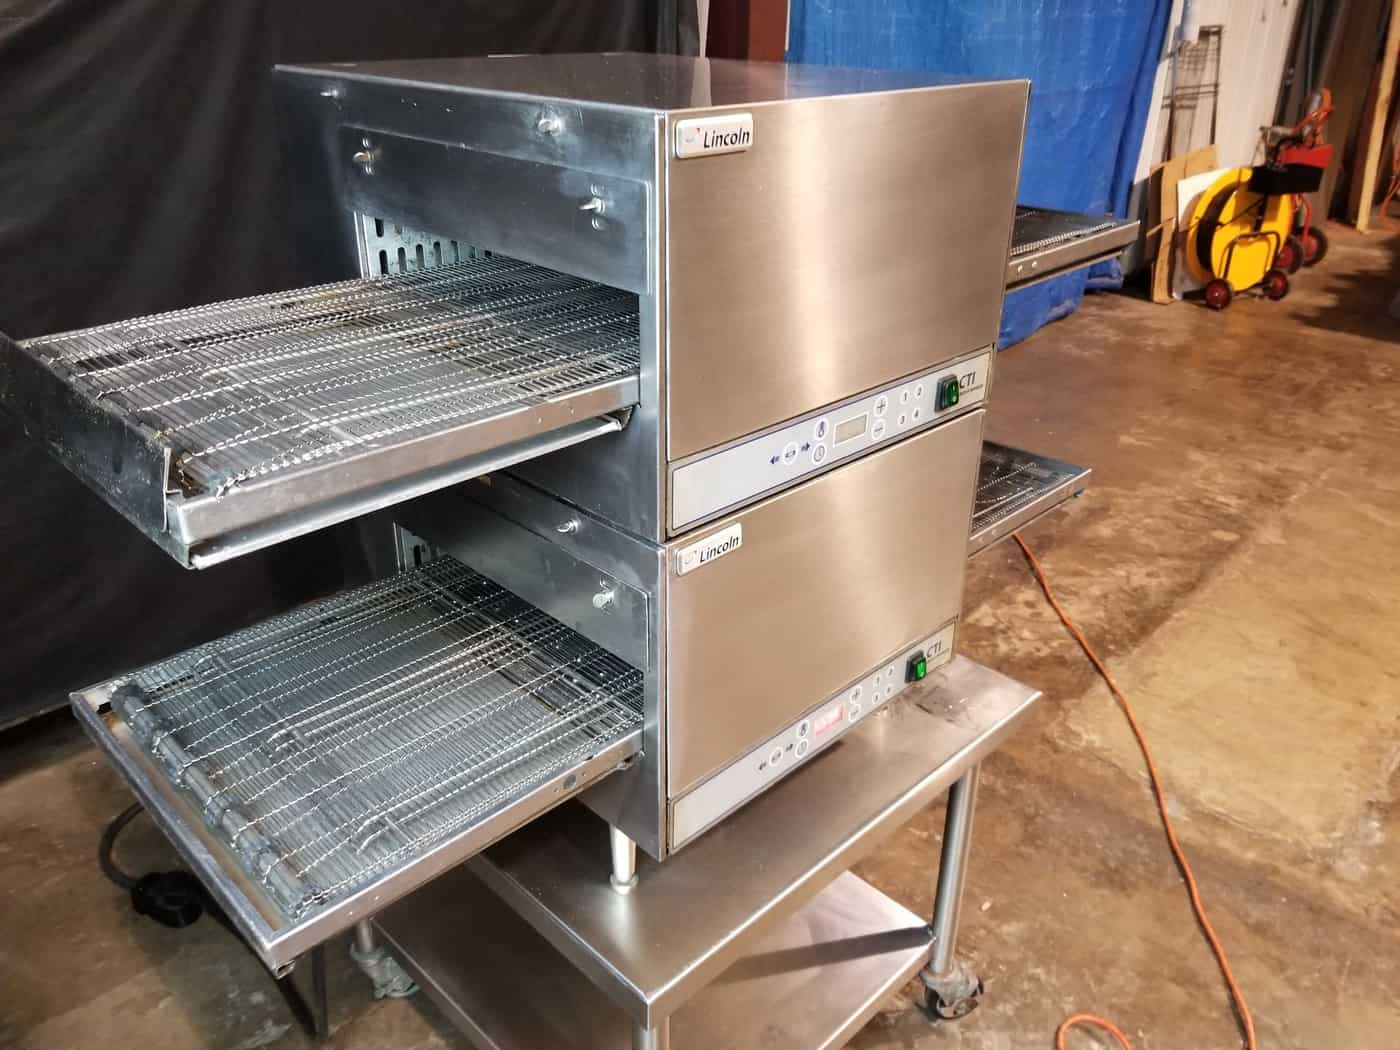 Lincoln Impinger 2501 Conveyor Pizza Ovens